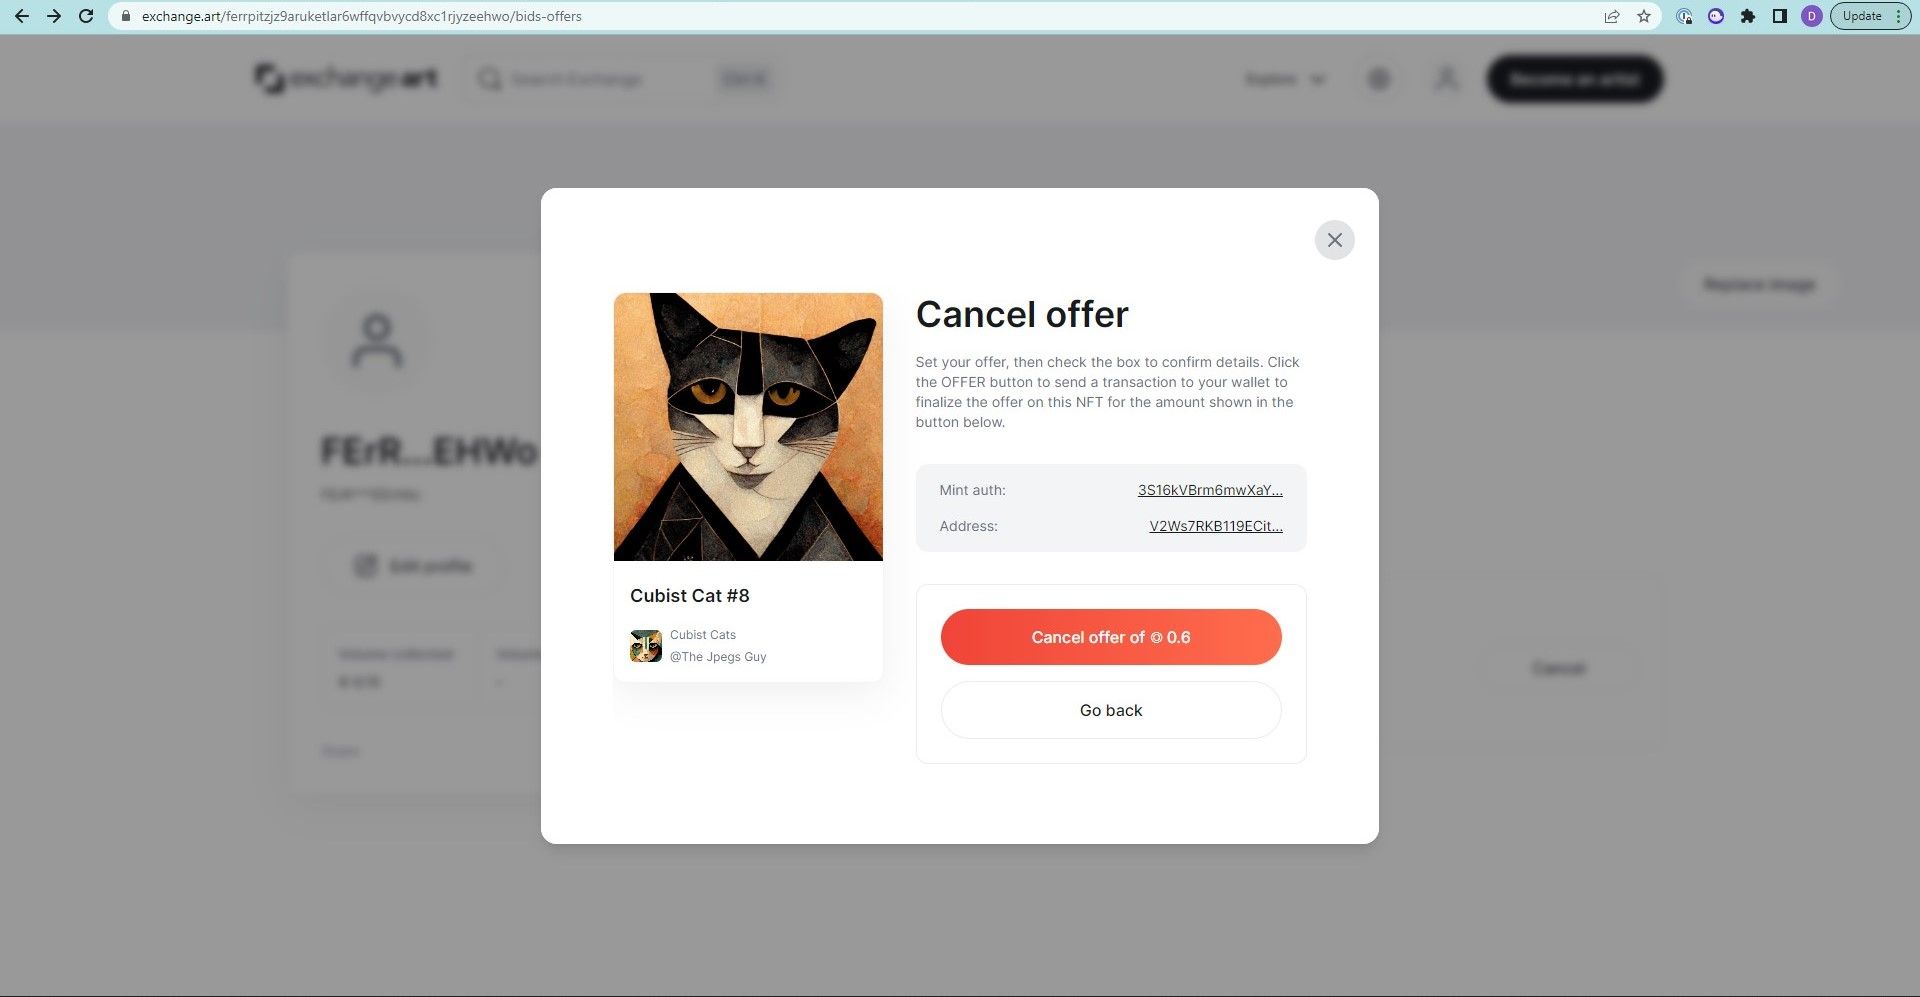 A screenshot from ExchangeArt - a black and white cat in cubist style. The heading is 'Cancel offer' but the body copy talks about setting the offer. There is no information about what will happen next.